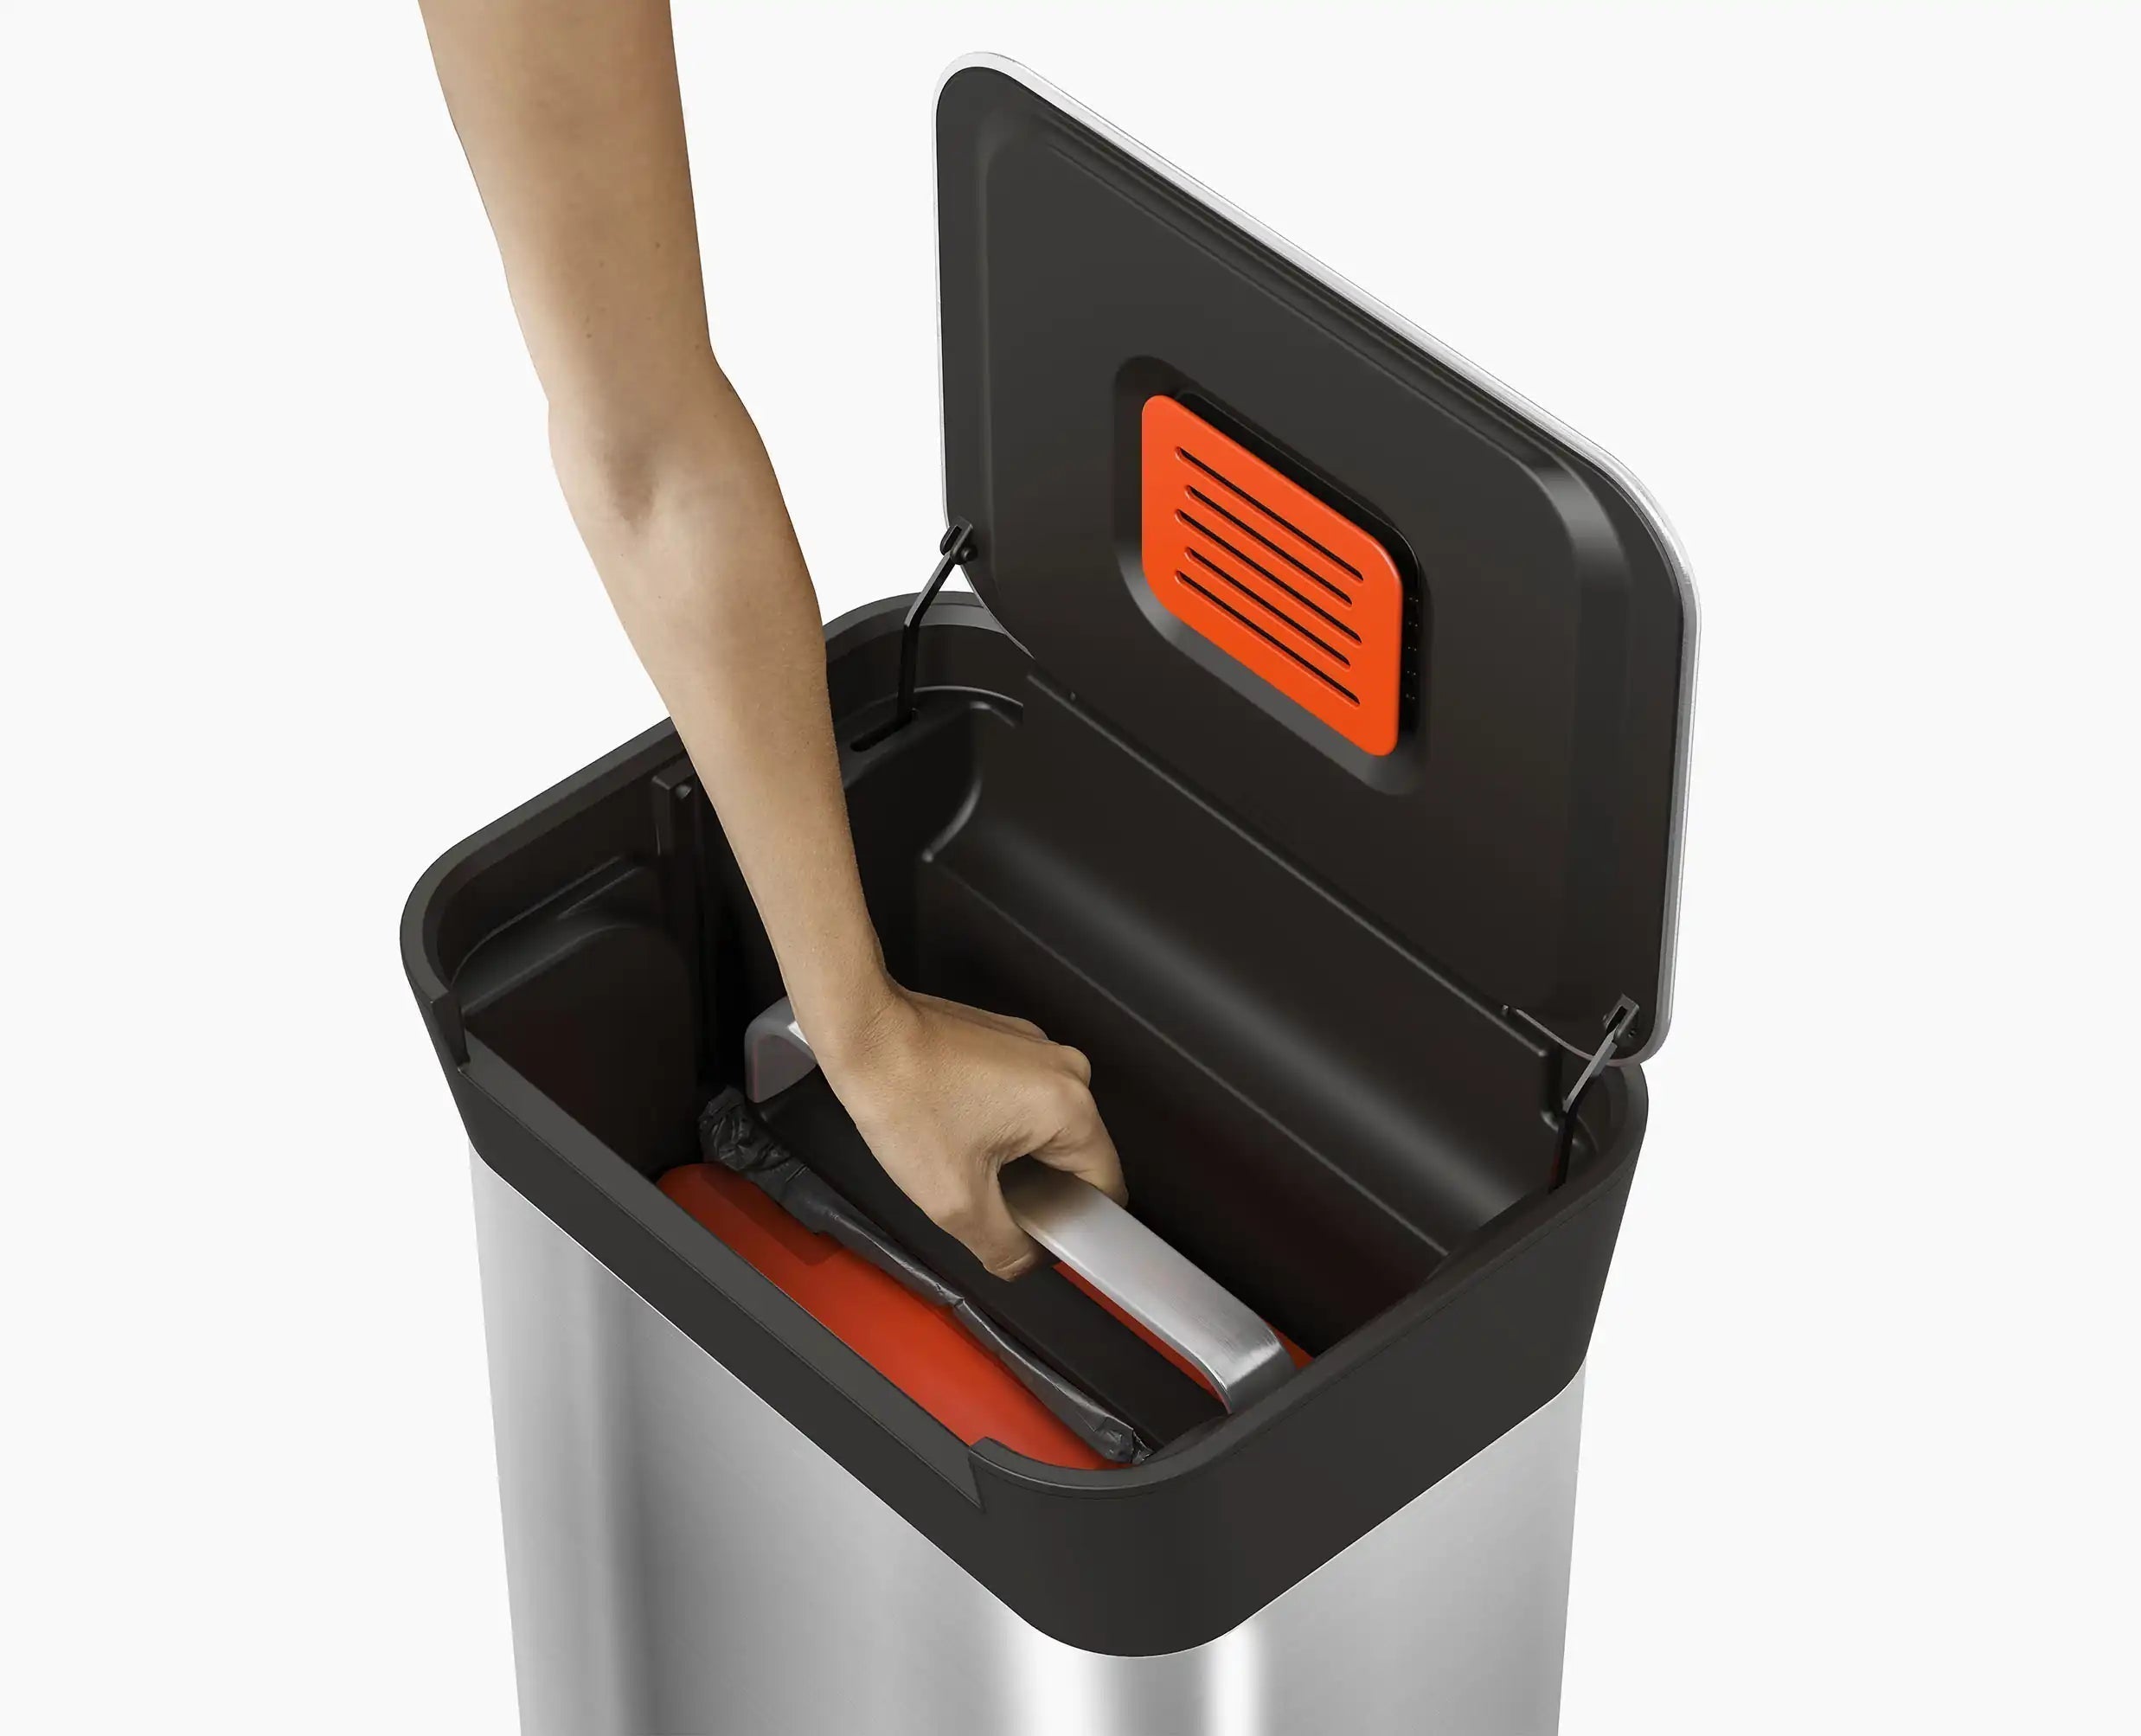 Joseph Joseph Titan 30L Trash Compactor Unboxing and How To. 